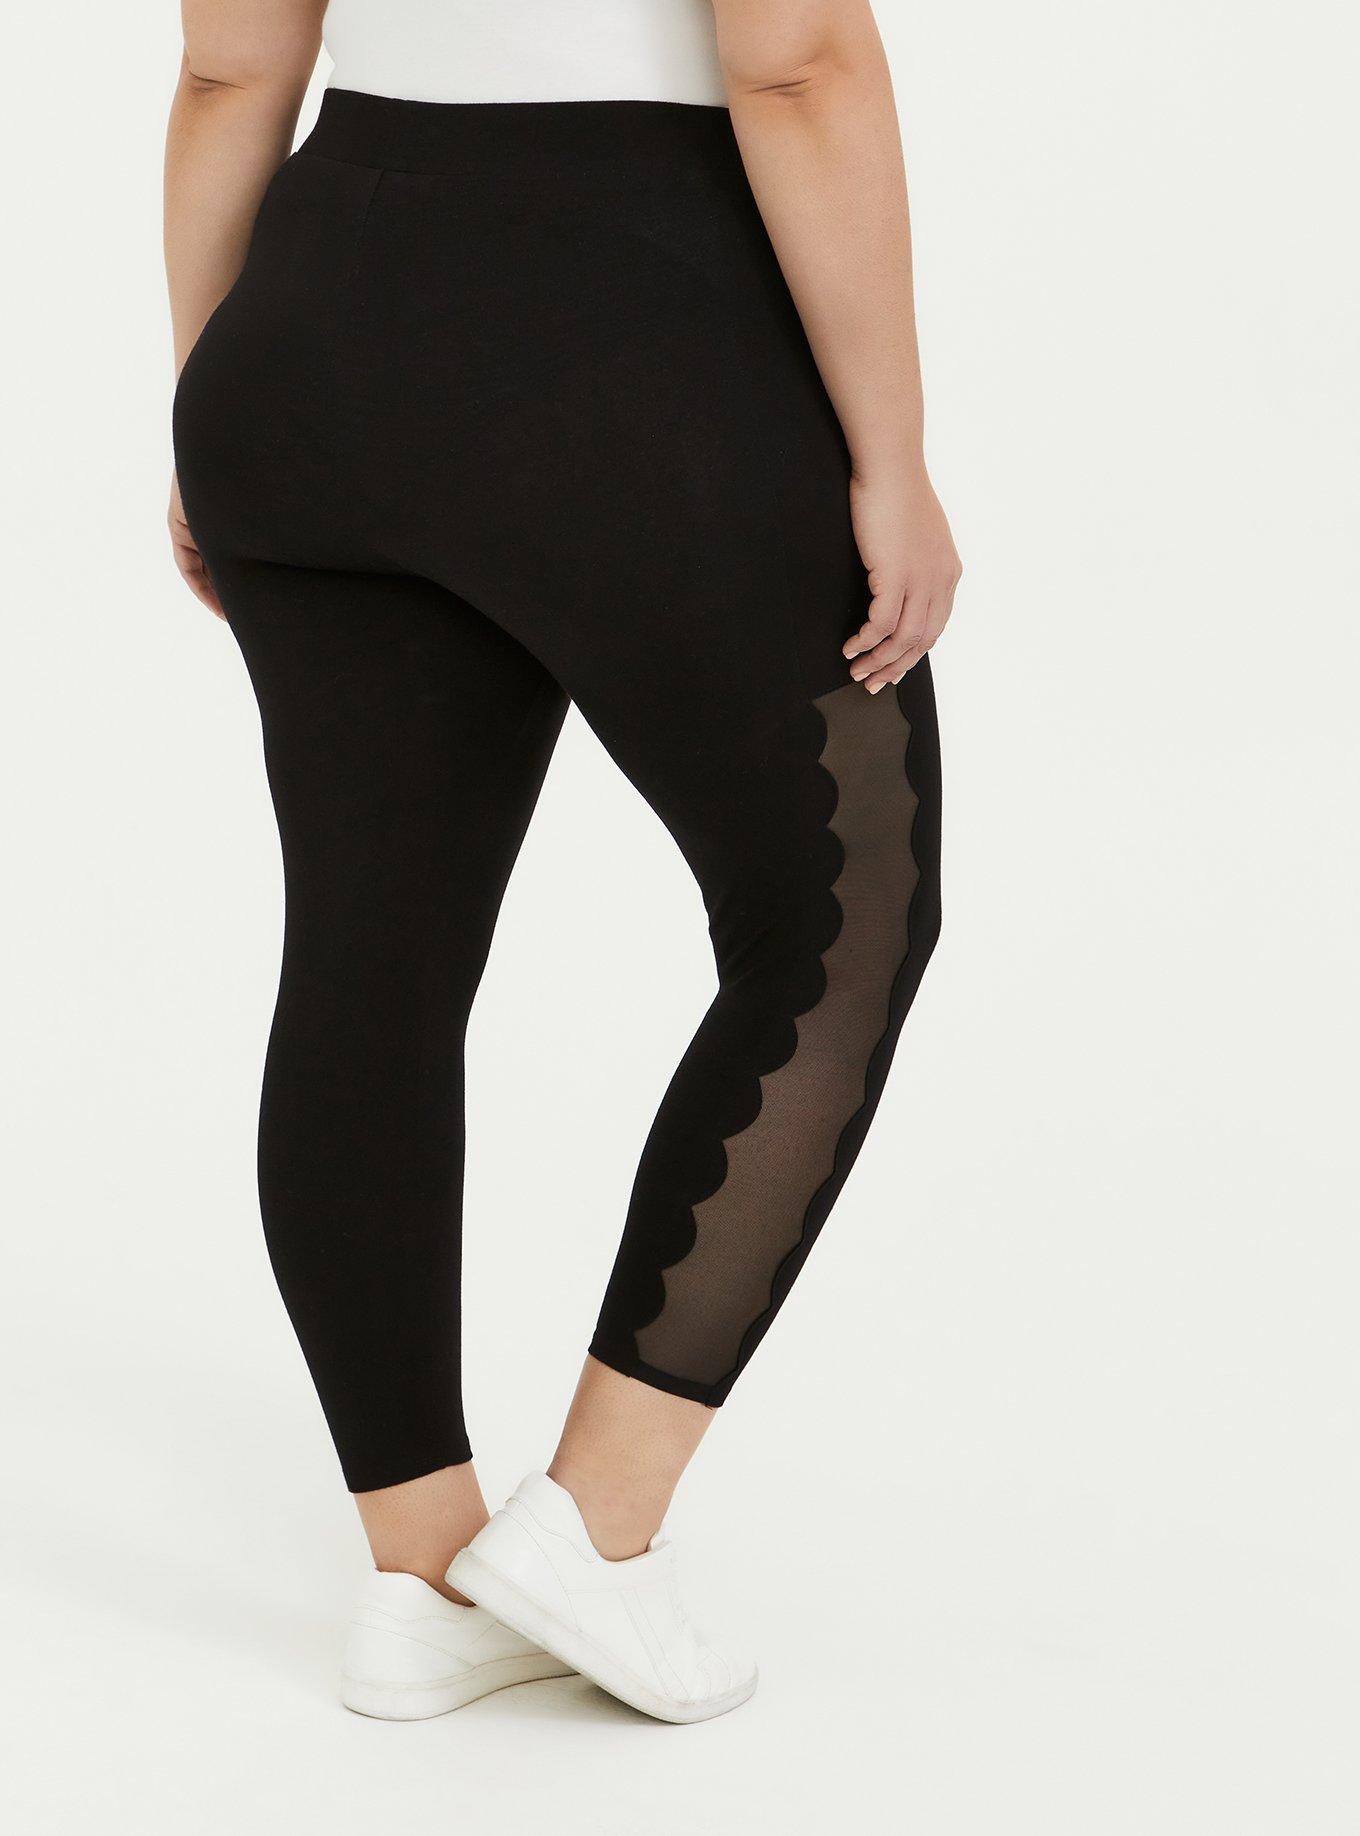 Mesh Insert Legging with Scallop Edges – Therapyapparelgroup